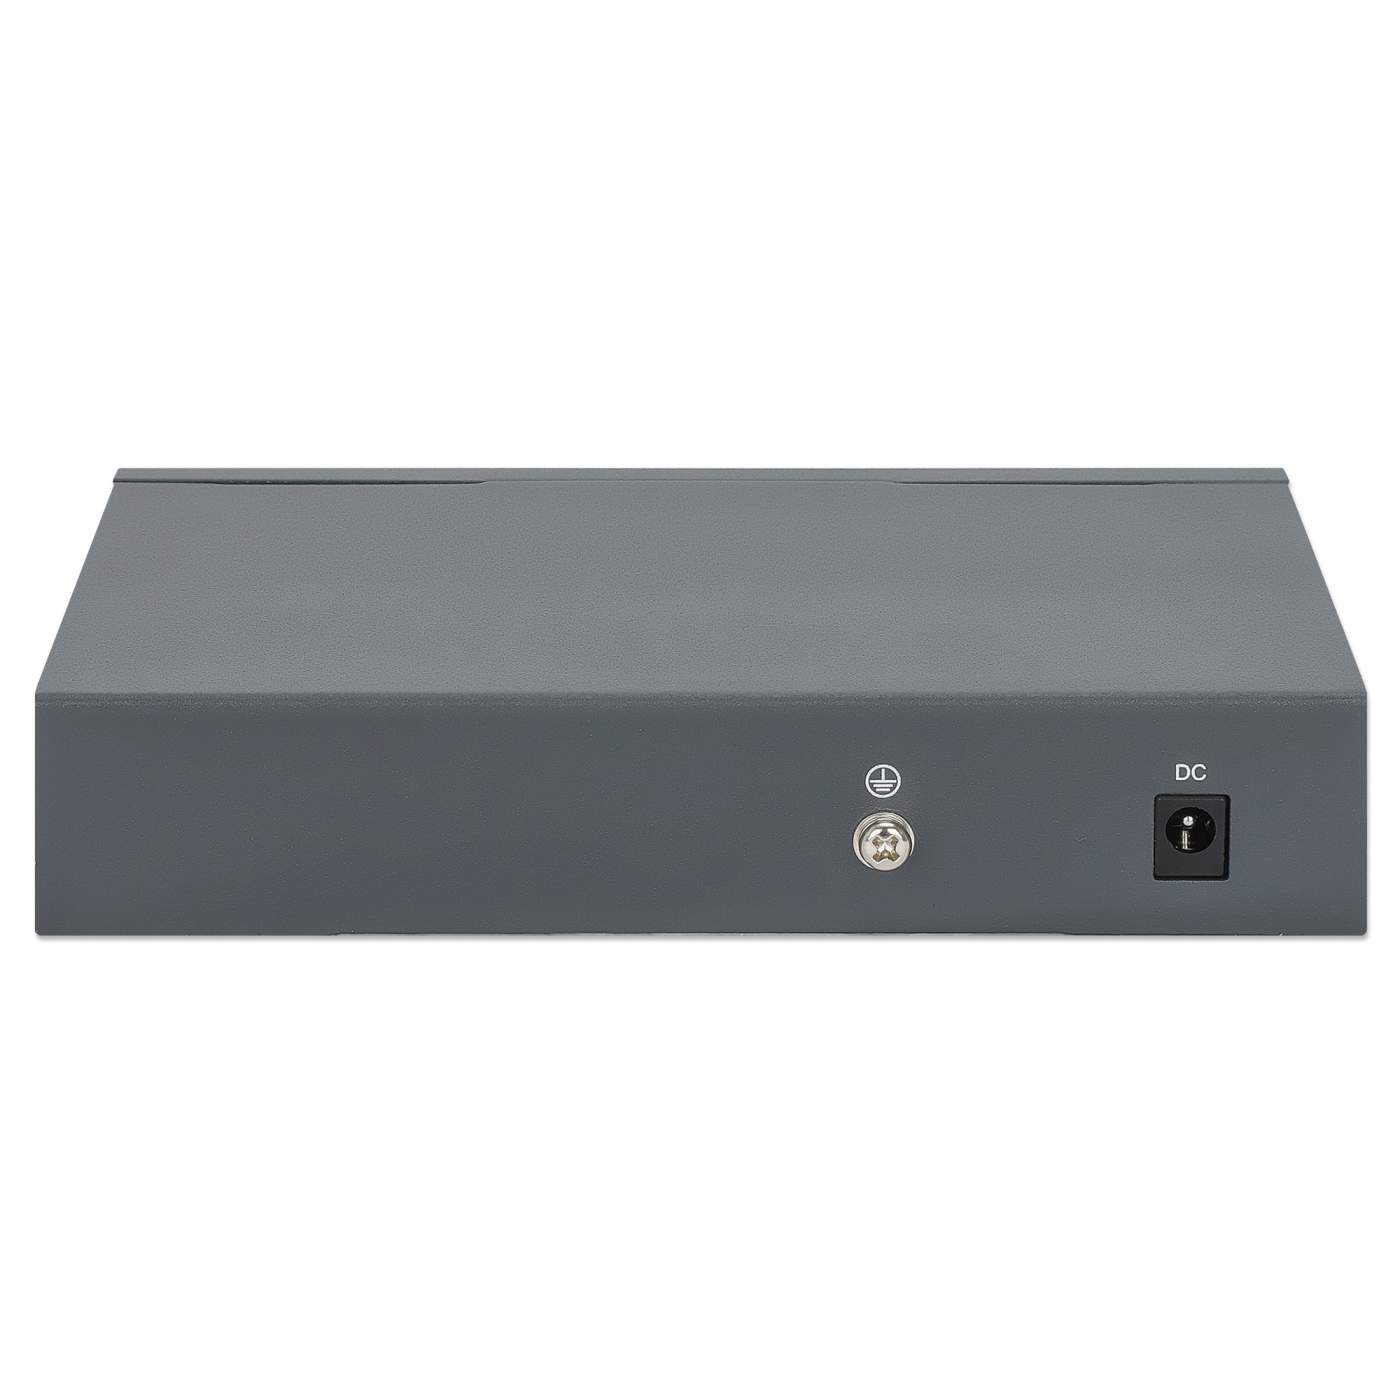 PoE-Powered 5-Port Gigabit Switch with PoE Passthrough Image 5